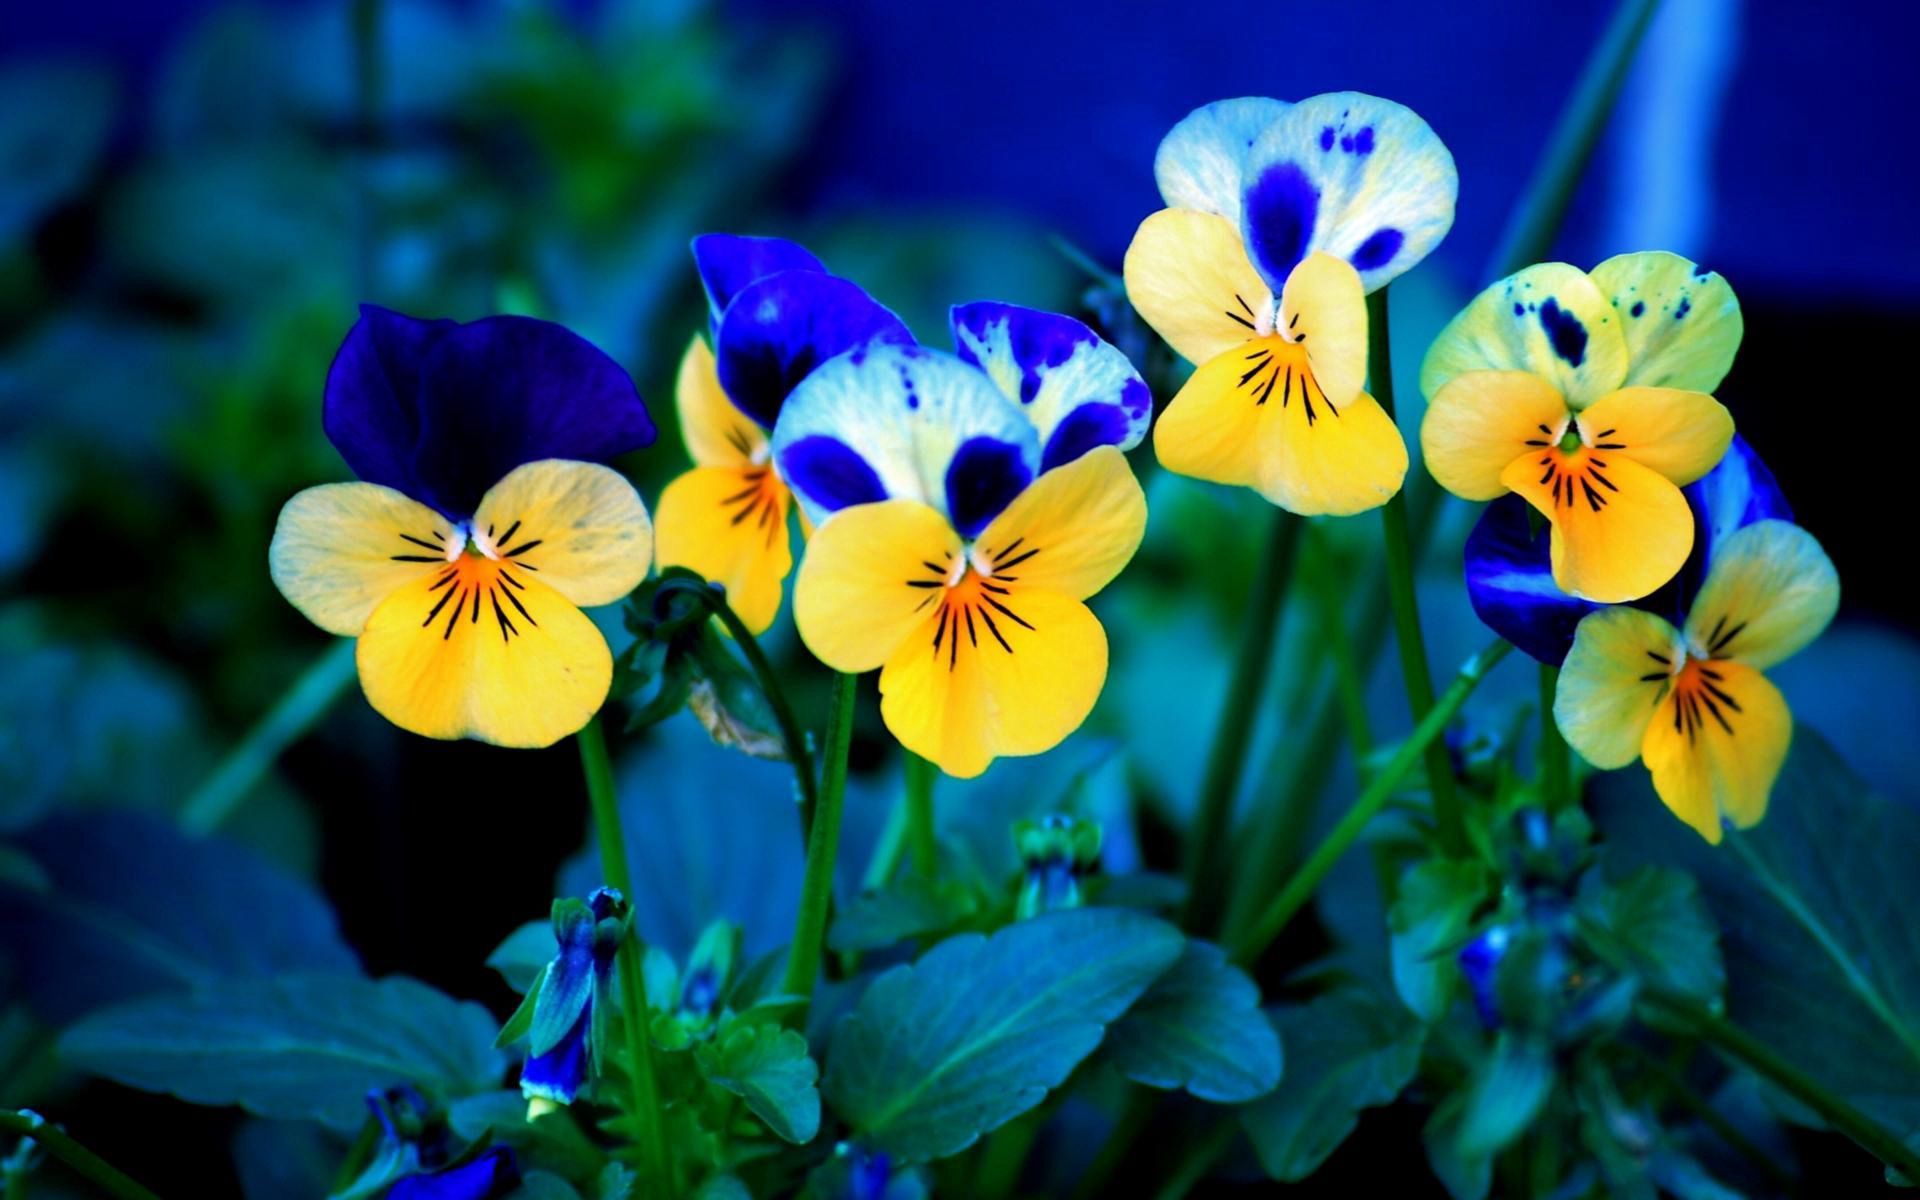 106865 download wallpaper flowers, pansies, polyana, glade screensavers and pictures for free